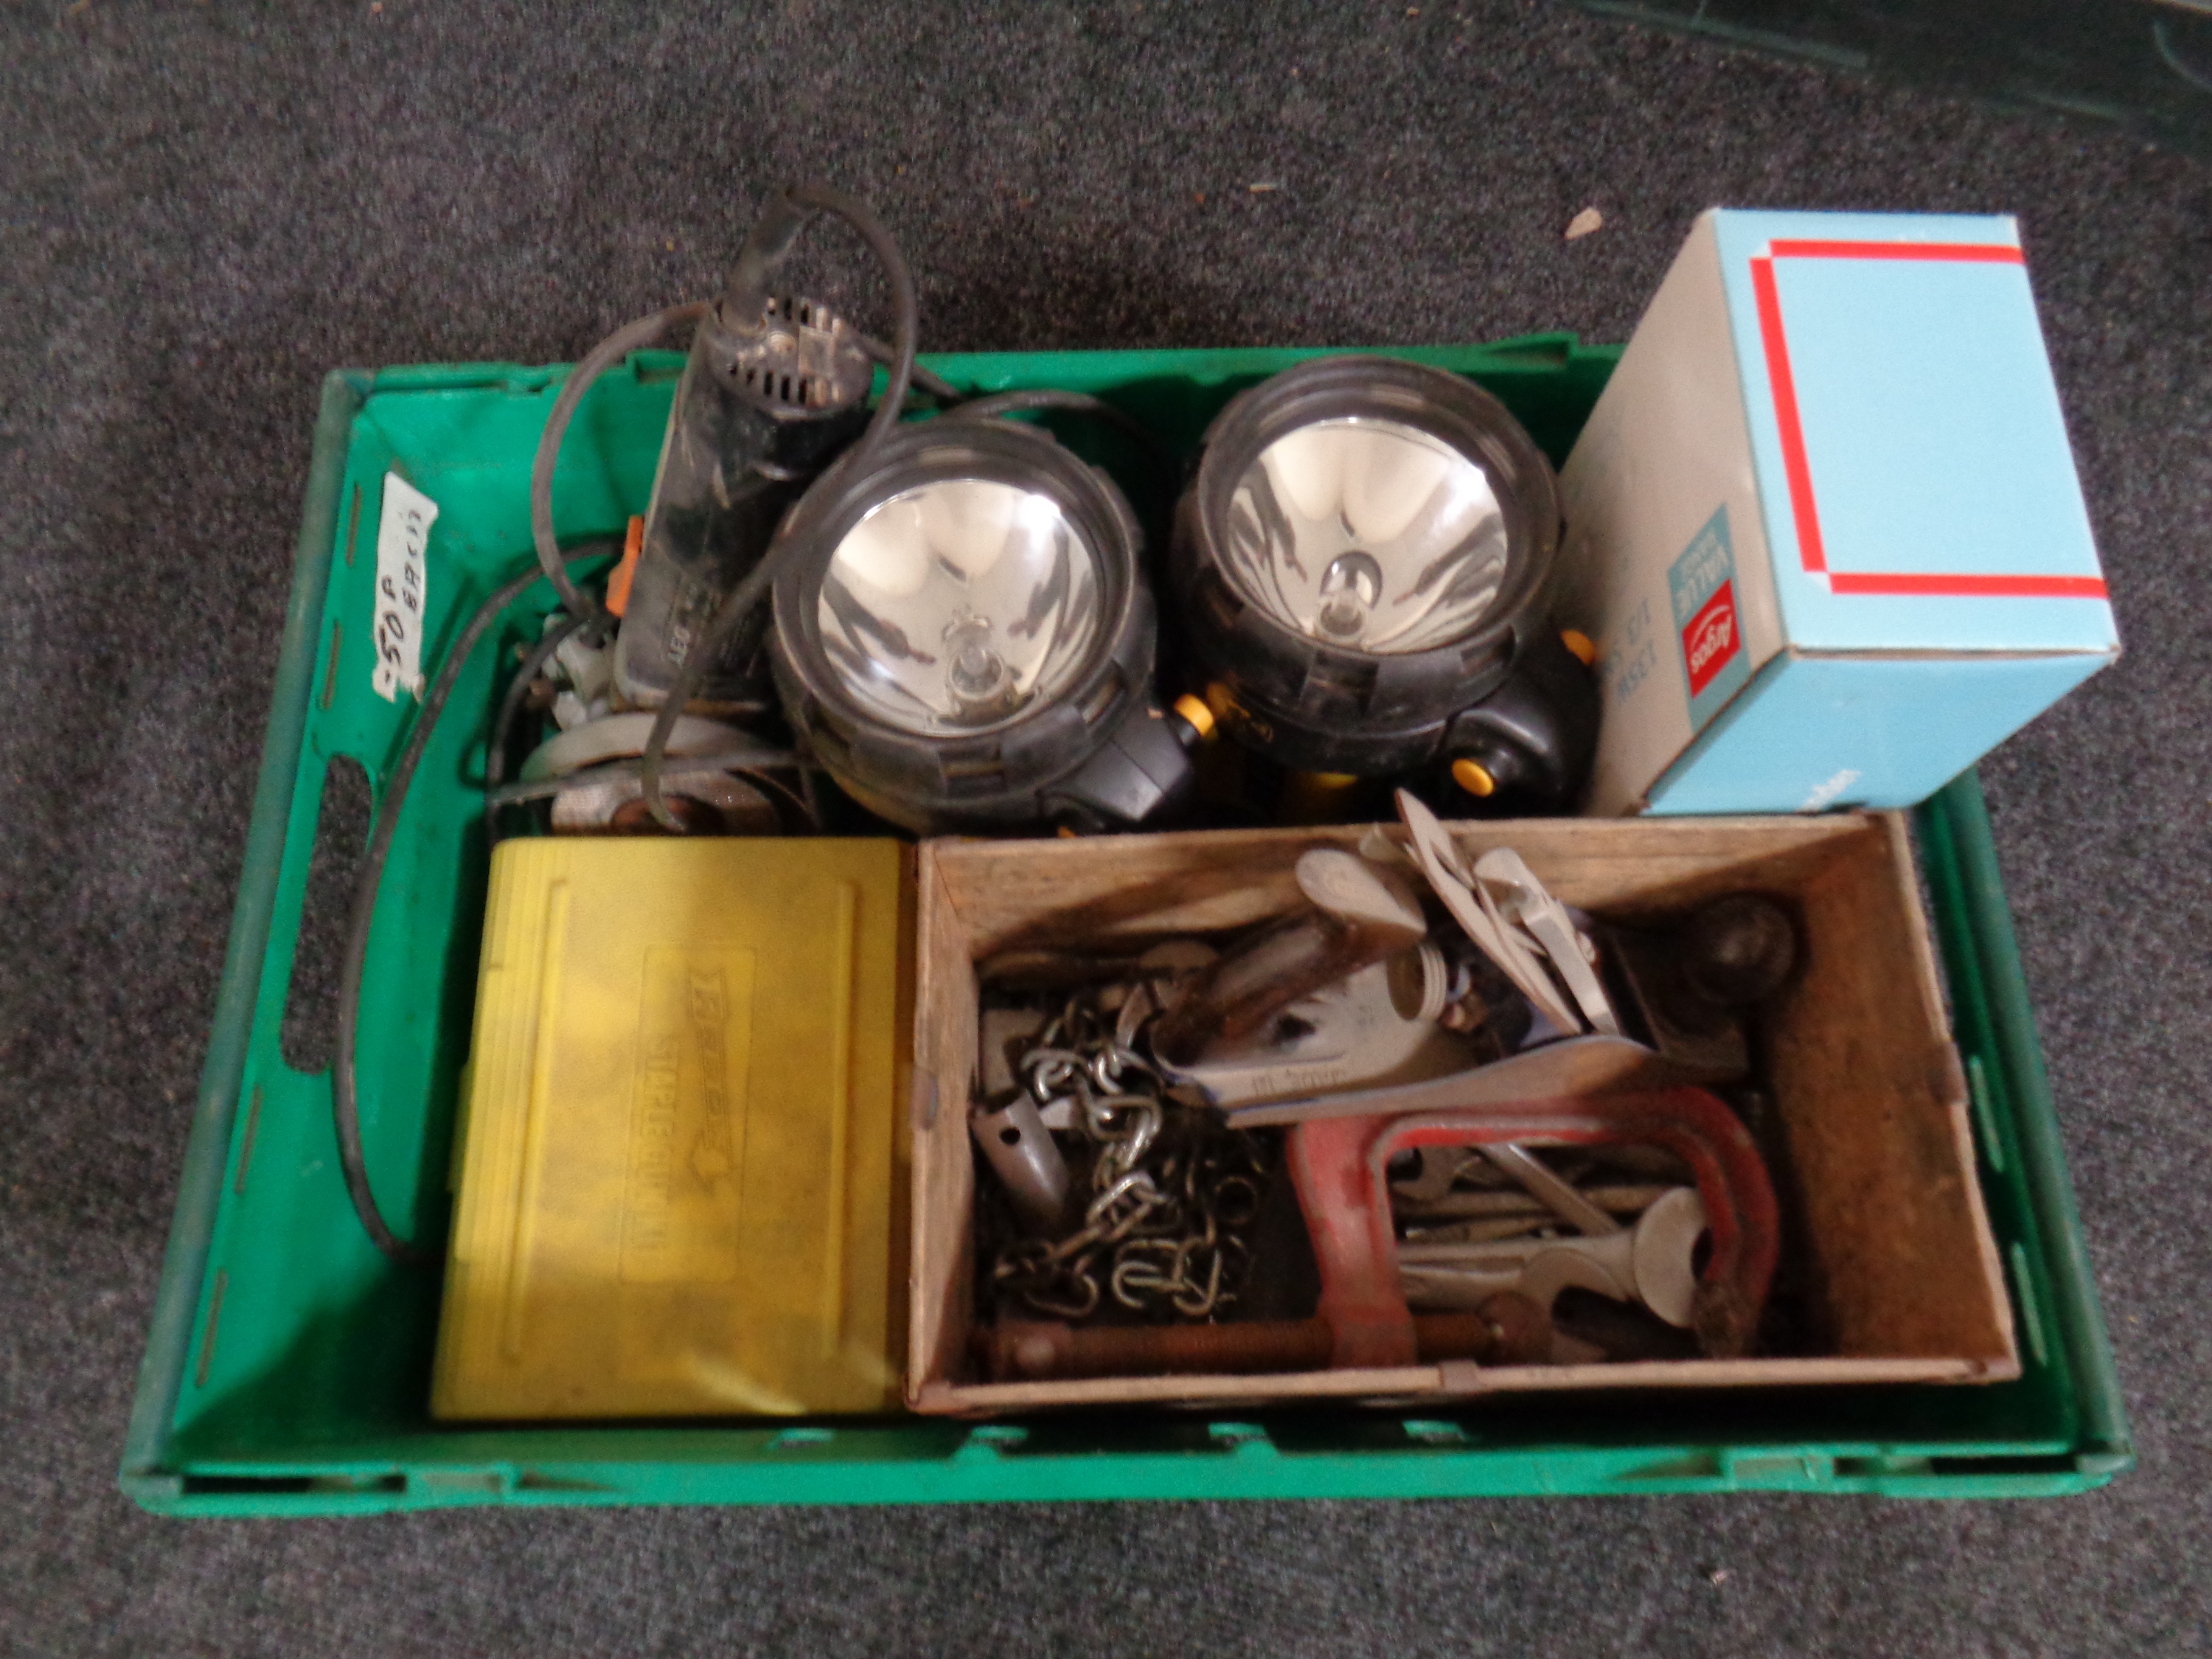 A crate of Record woodworking plane, G clamp, ring spanners, AEG angle grinder, staple gun,